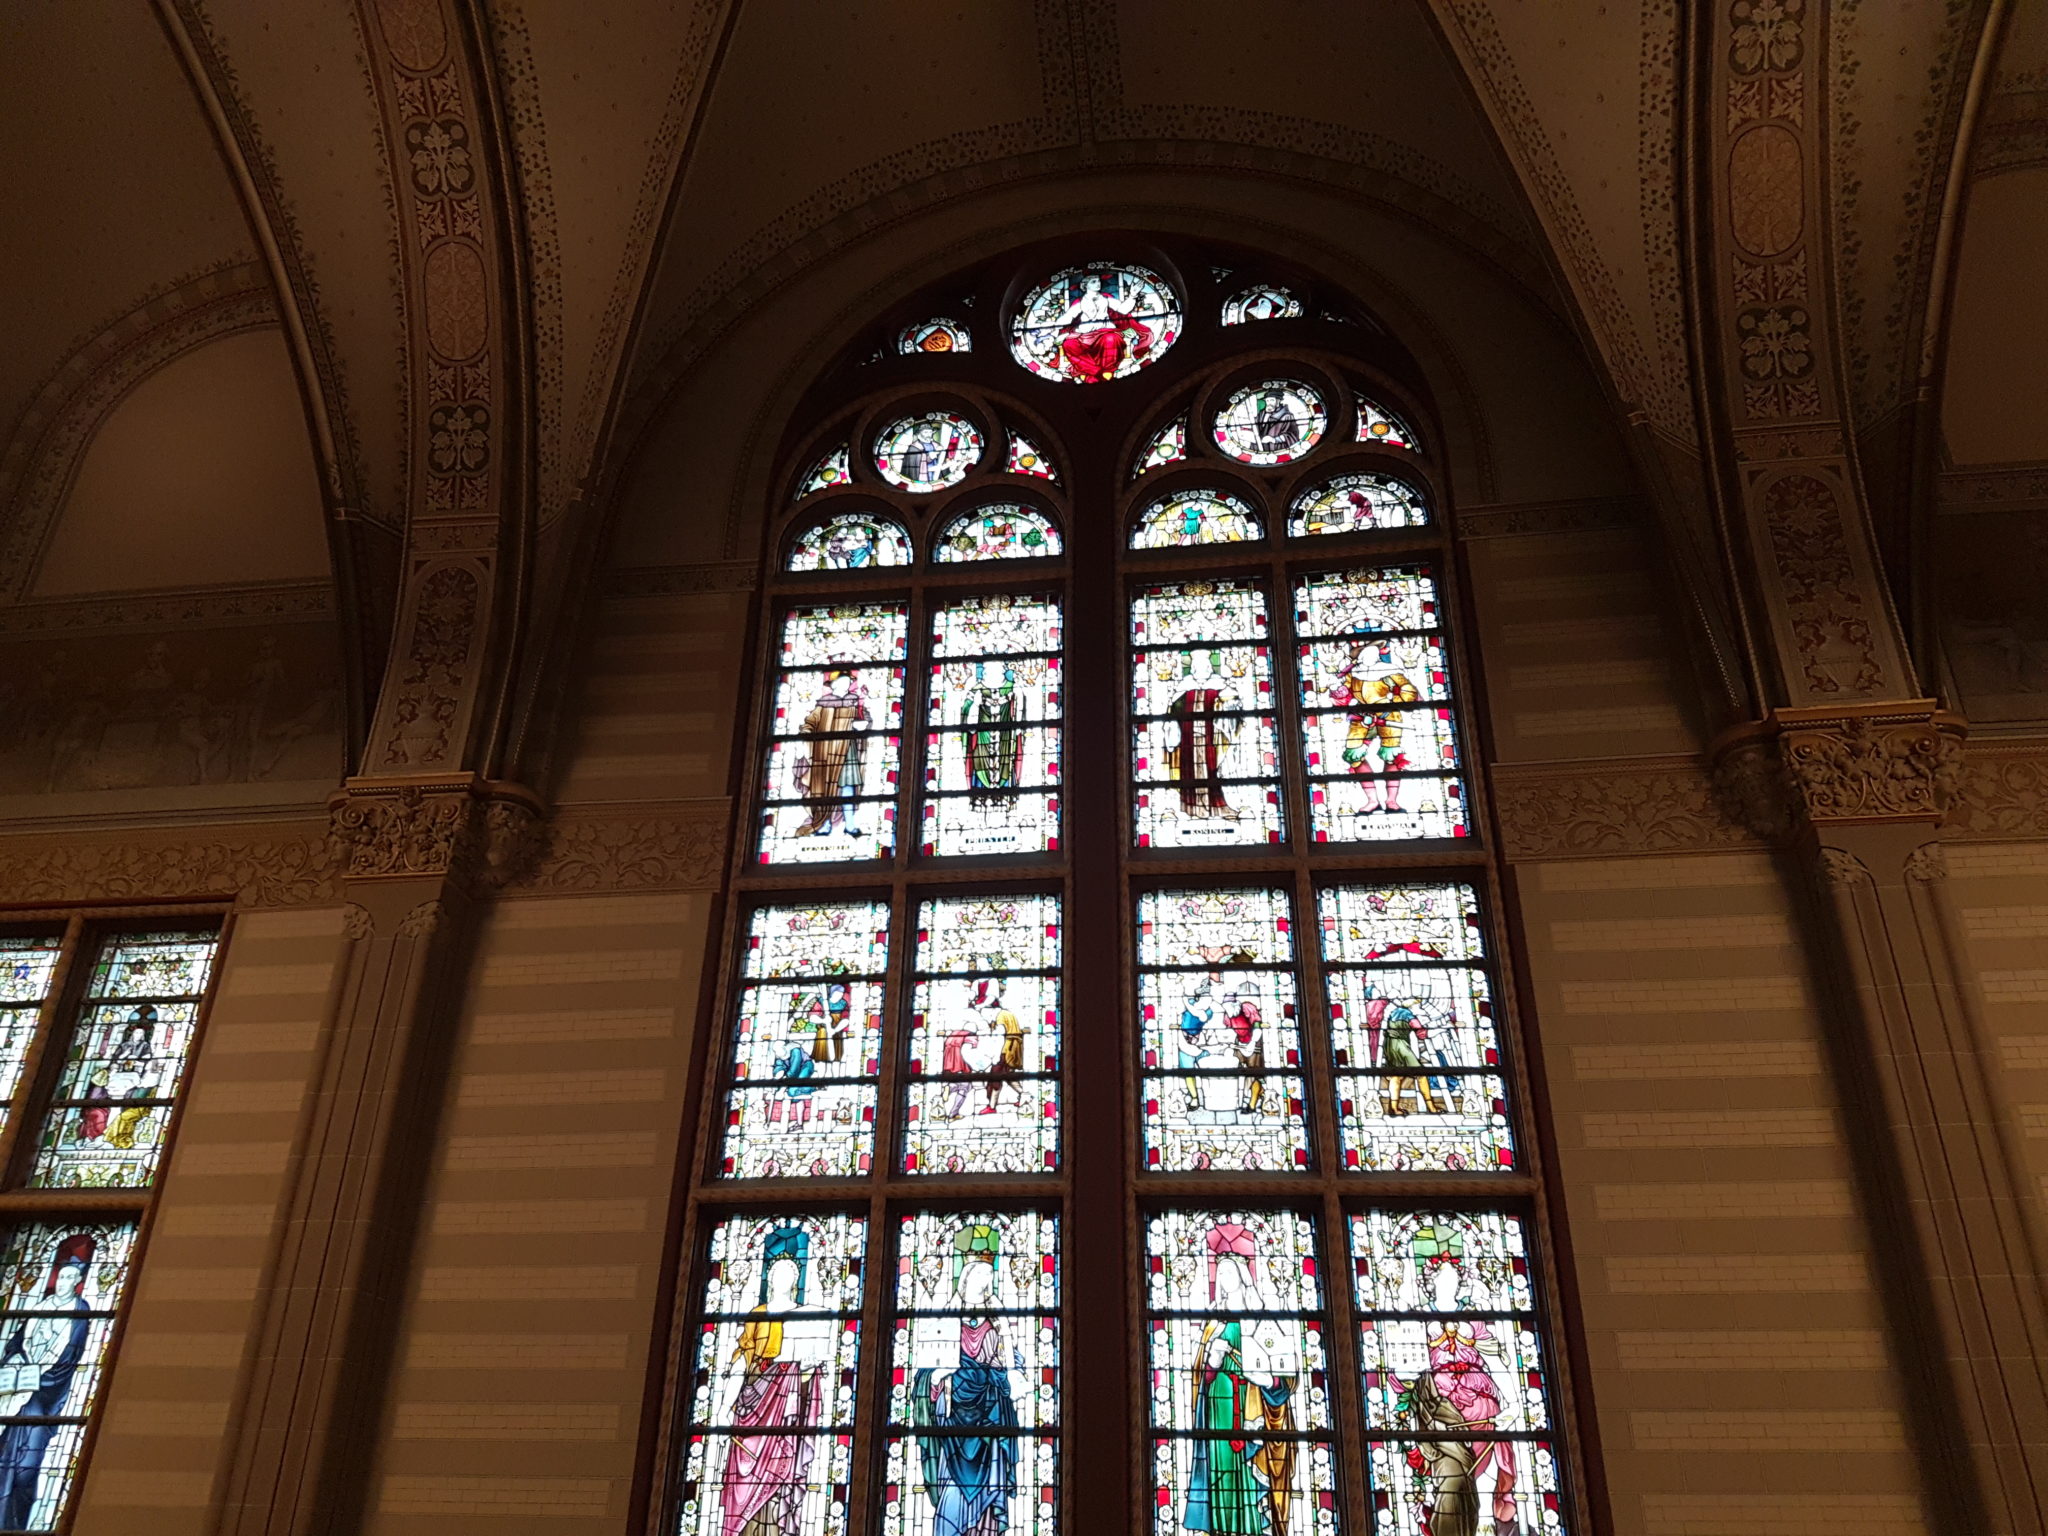 The Stained Glass at the Rijksmuseum